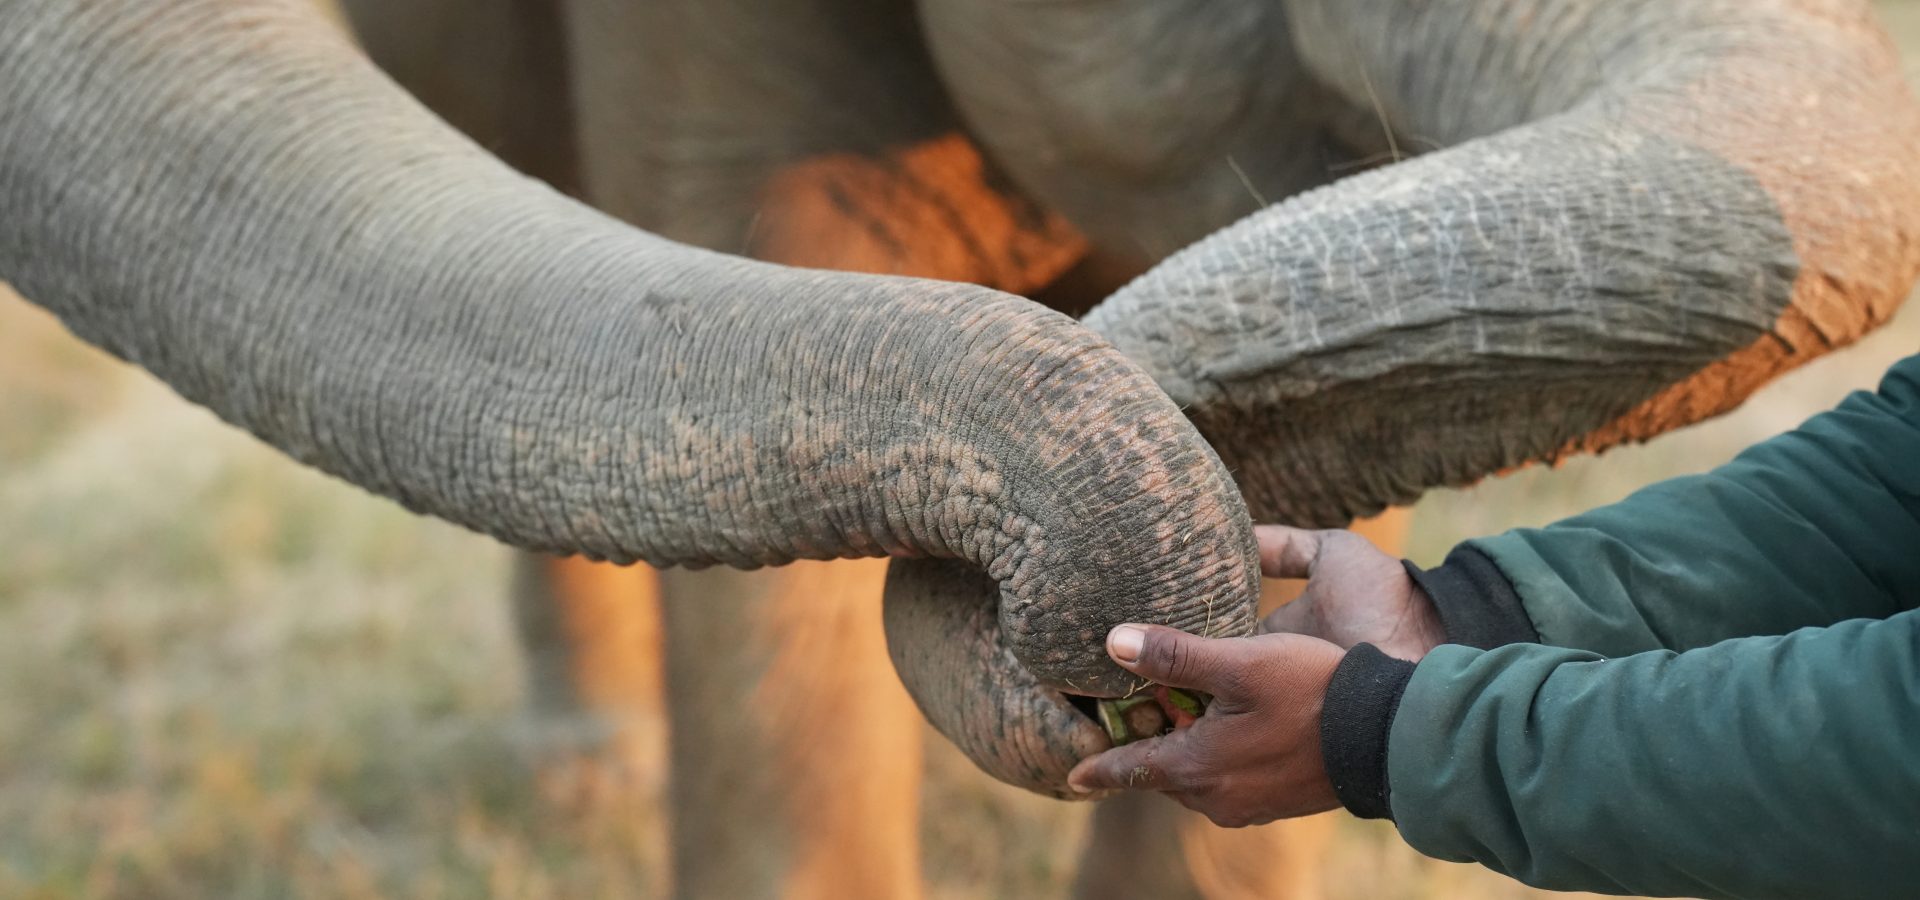 8 Fascinating Facts About An Elephant's Trunk! - Wildlife SOS